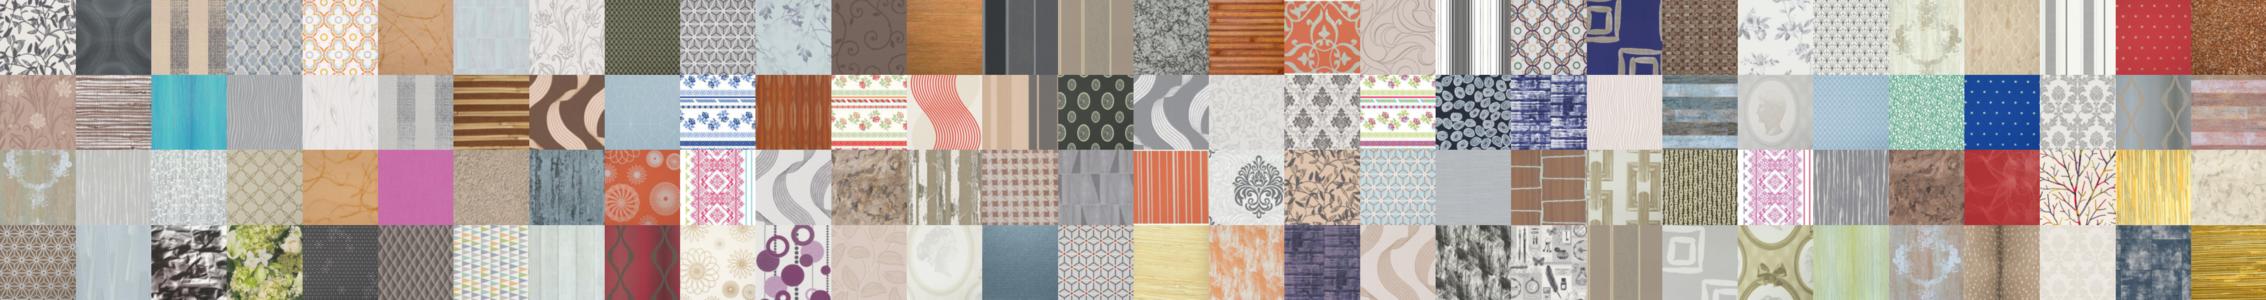 A collage of wallpaper